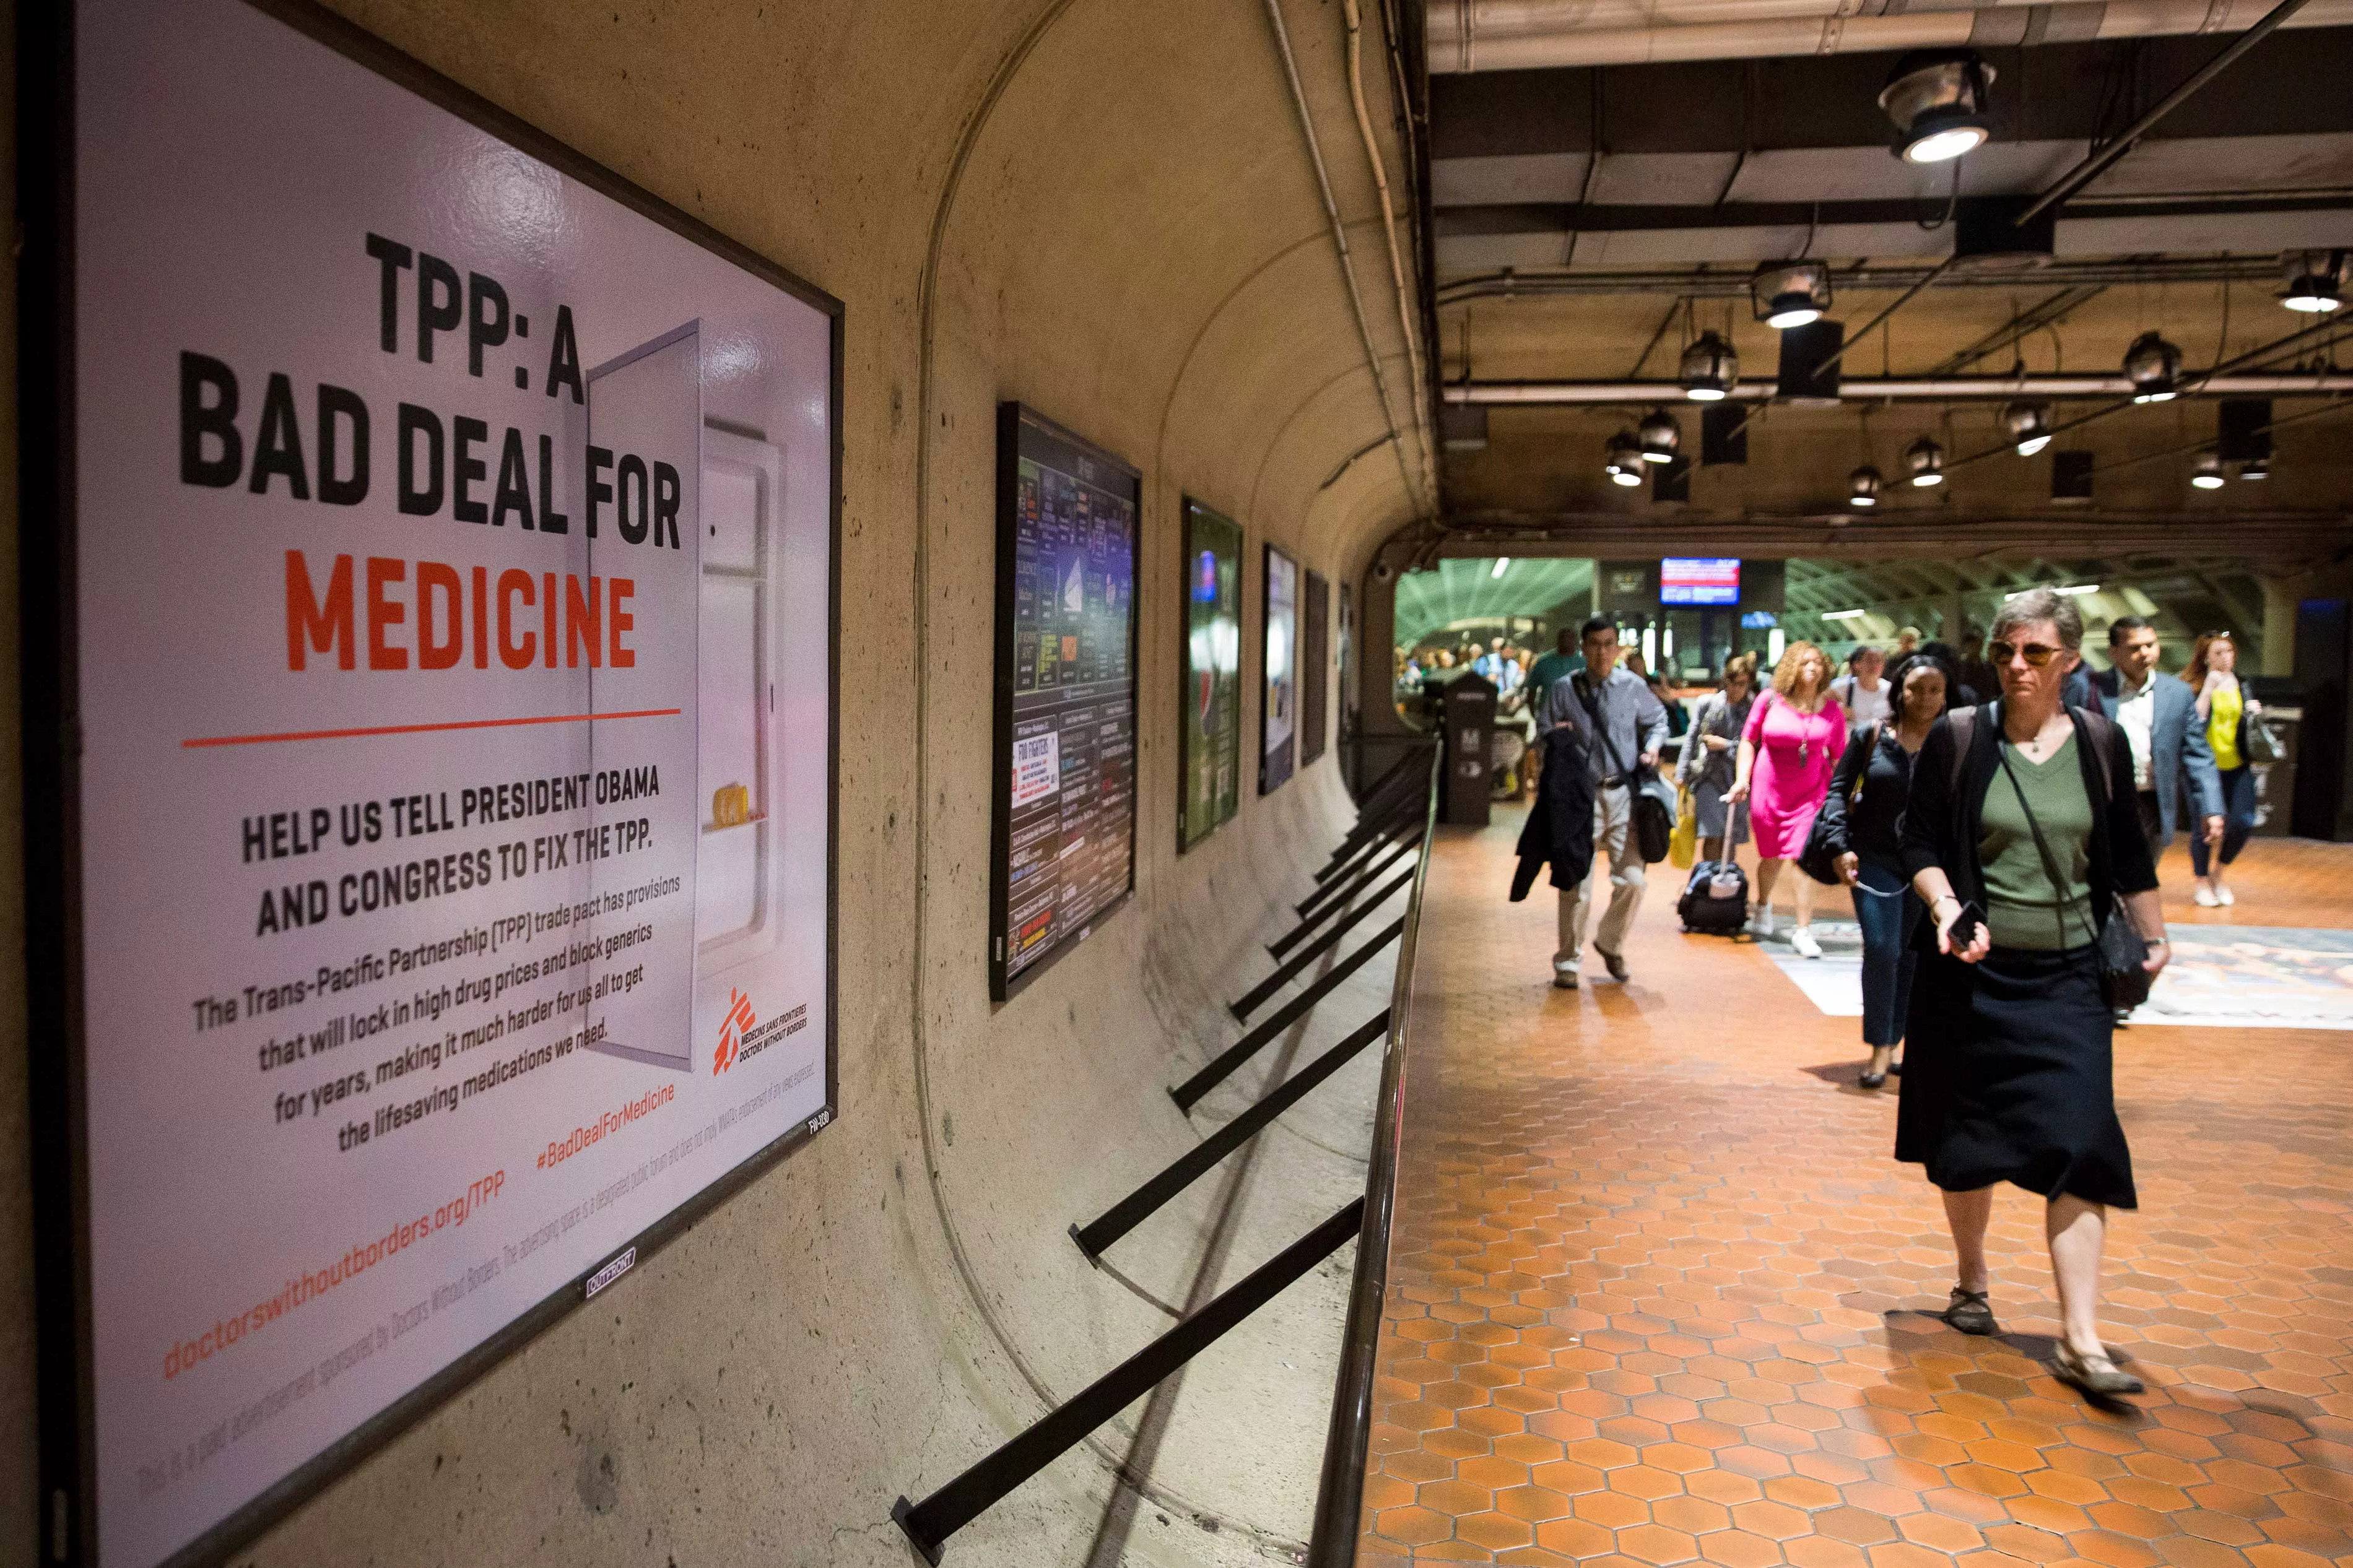 Metro advertisements for Doctors Without Borders, 2015.